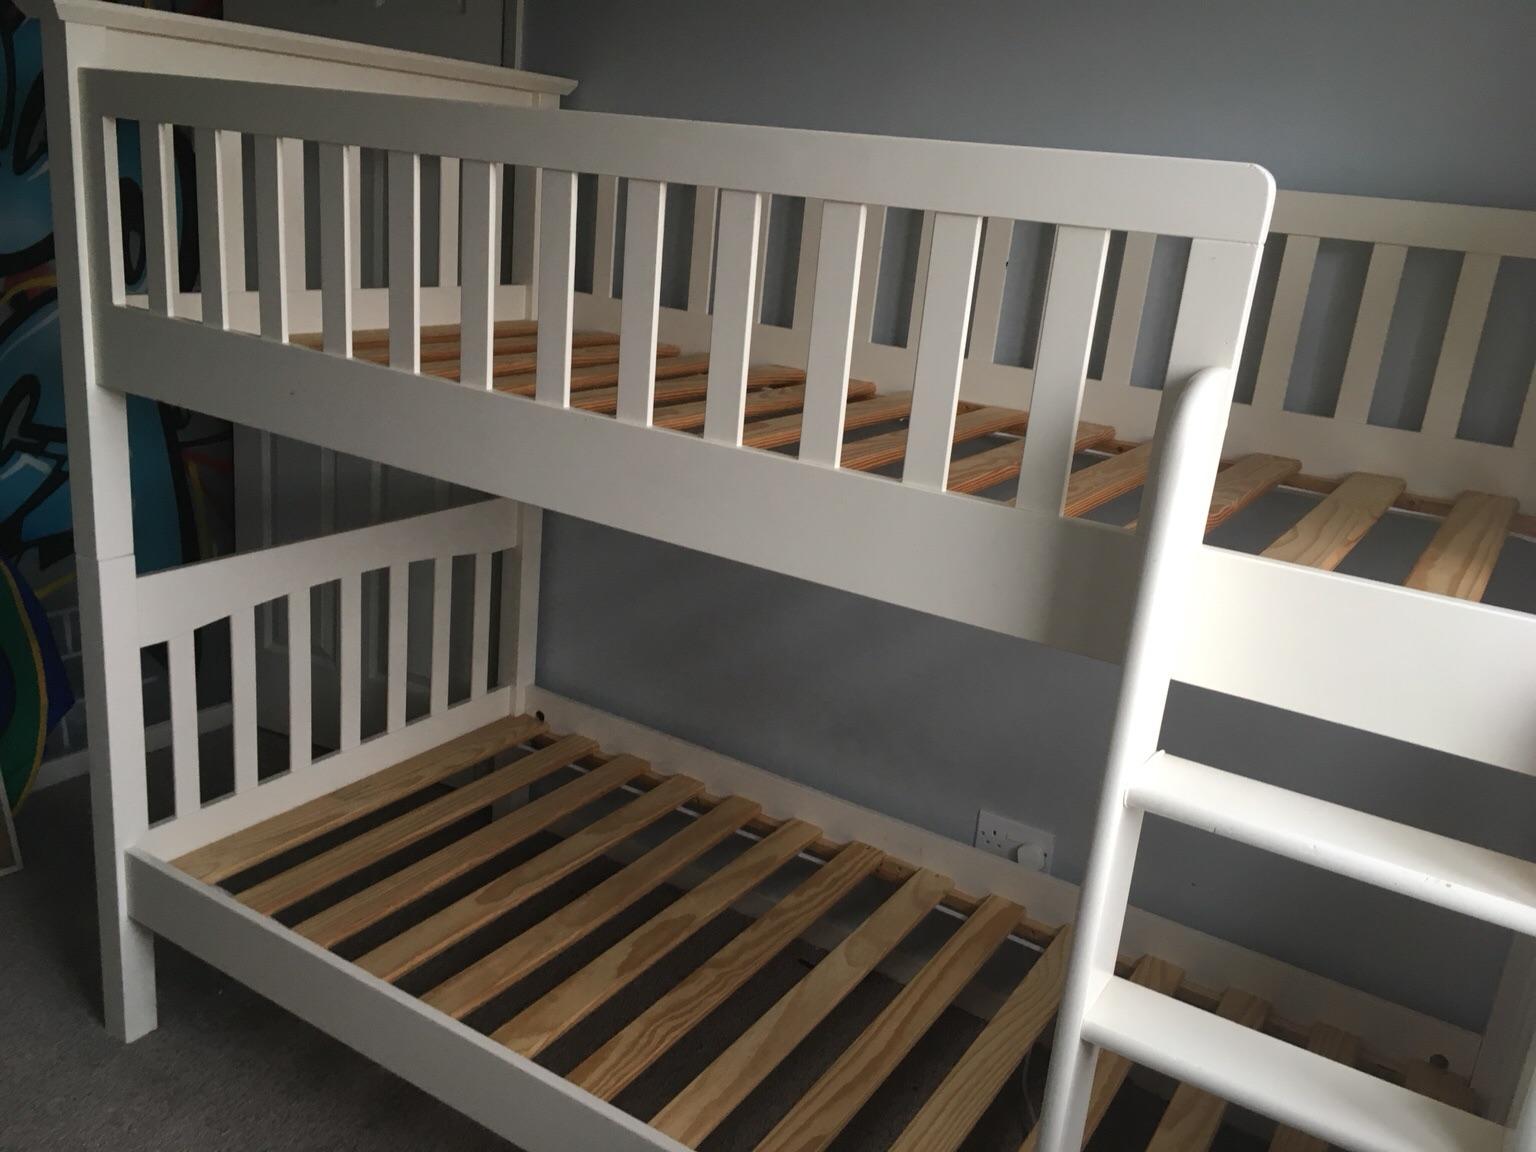 marks and spencer bunk beds